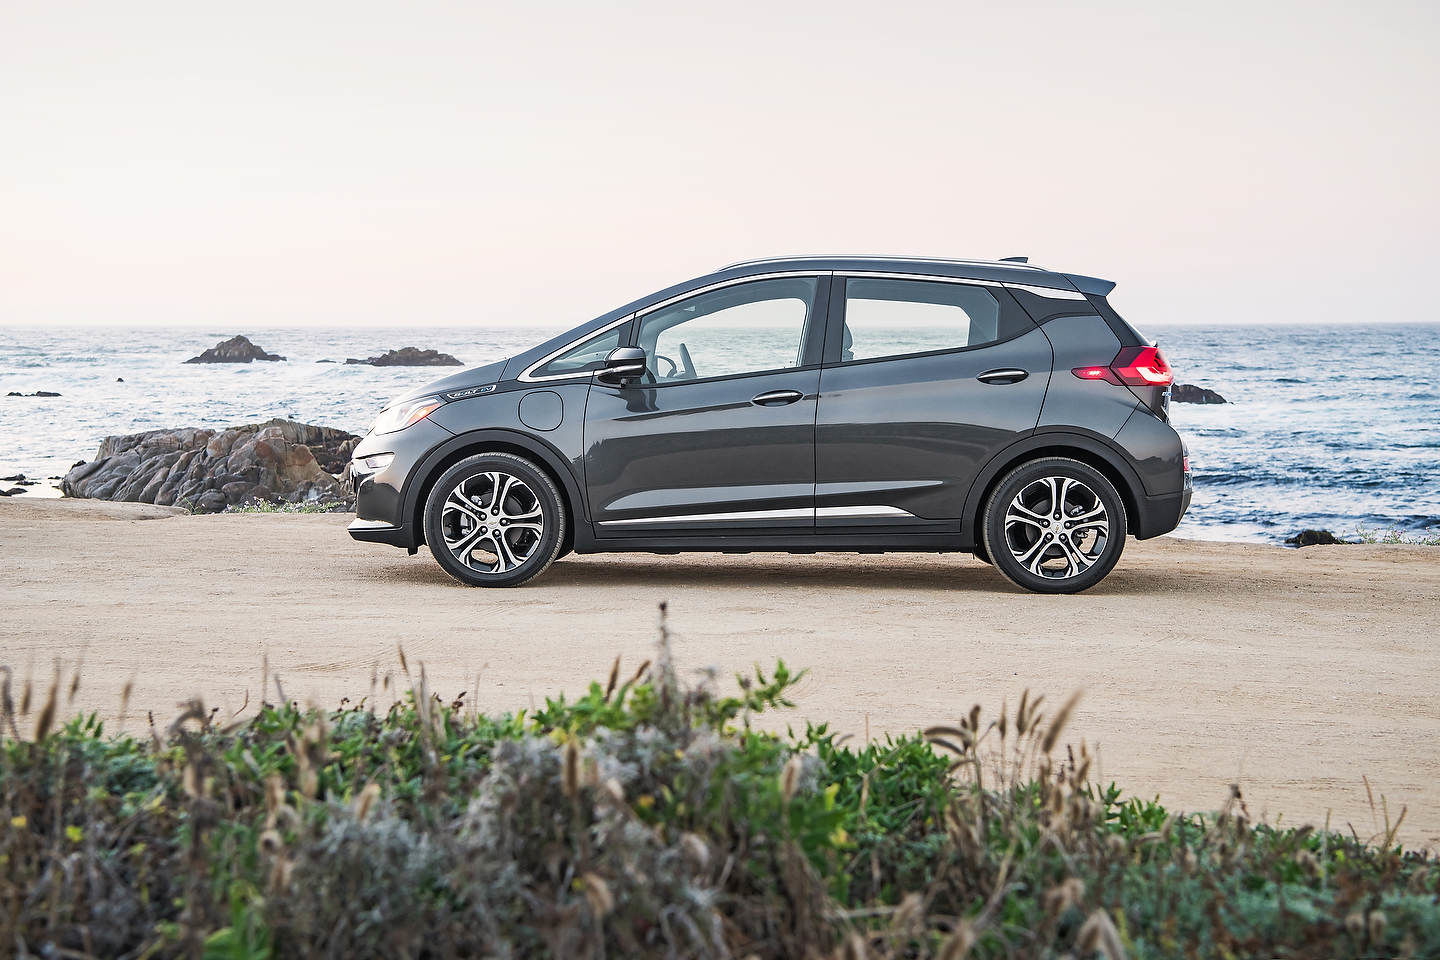 A Pre-Owned Chevrolet Bolt: Now’s the Time